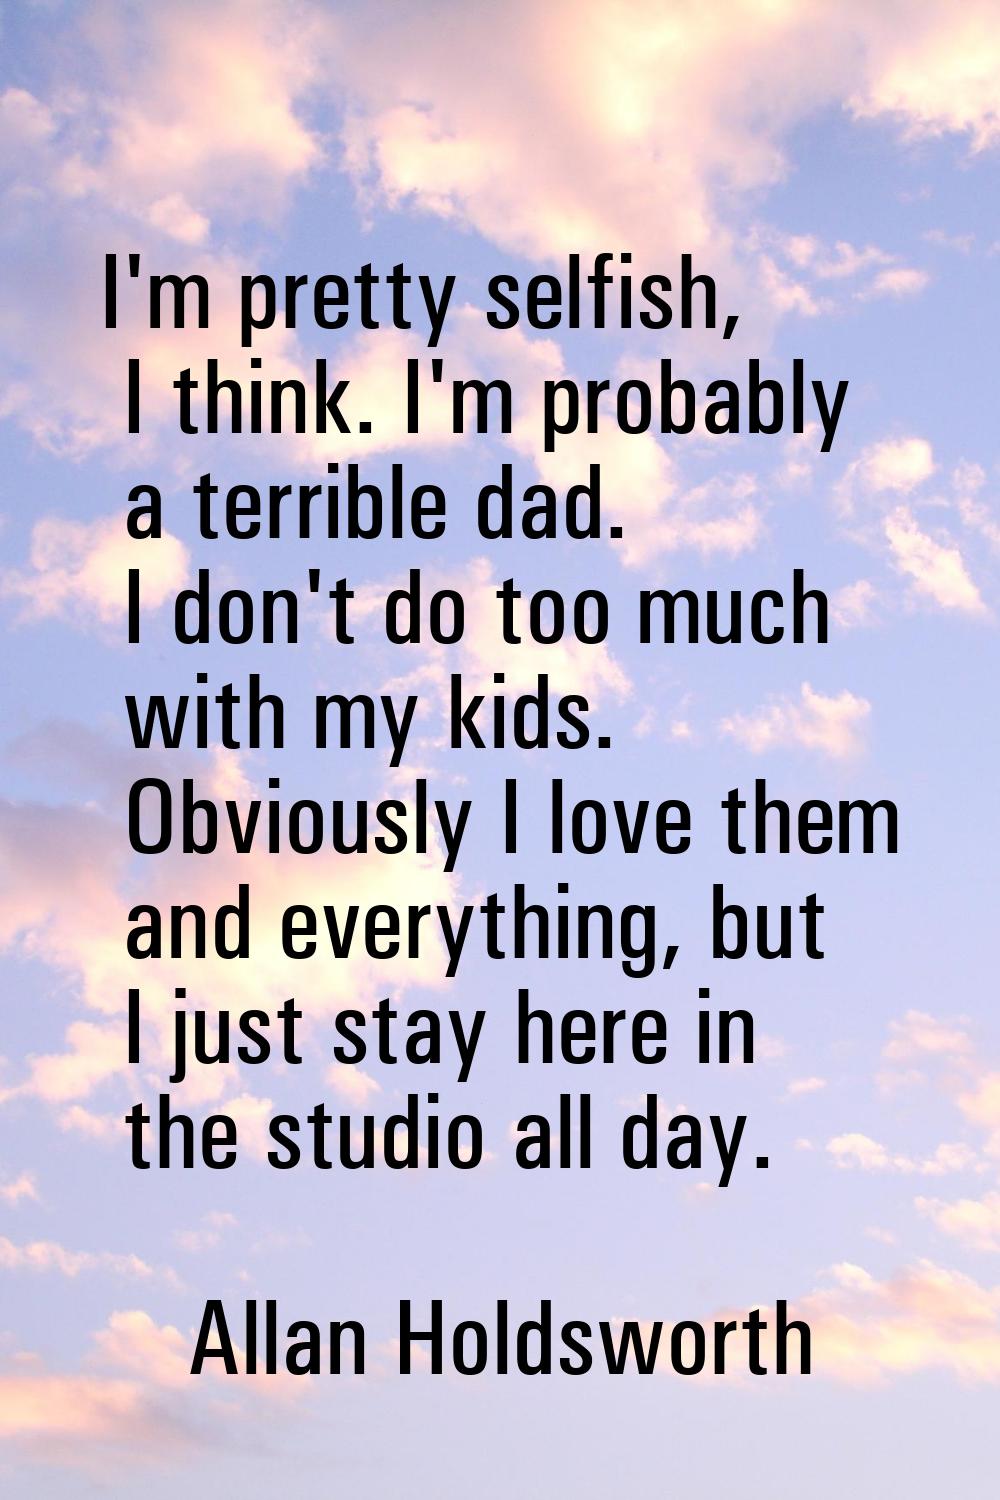 I'm pretty selfish, I think. I'm probably a terrible dad. I don't do too much with my kids. Obvious